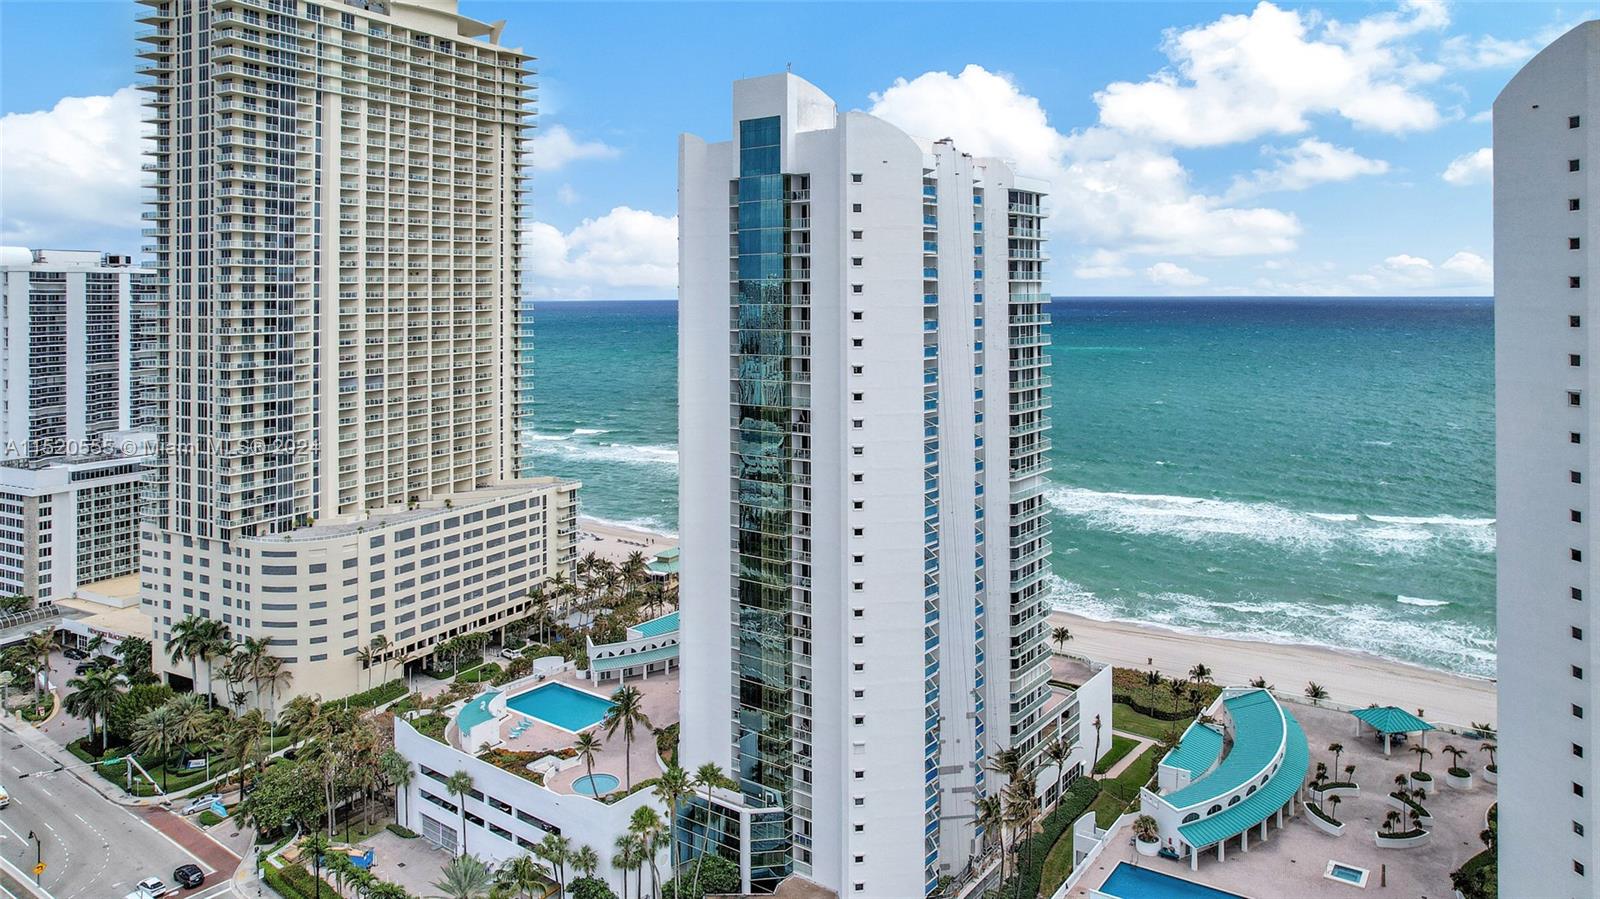 Lowest price per square foot in the building! Fantastic opportunity to live as if you're on staycation in a world-class resort!"Enjoy the serenity of this fully furnished corner home with stunning ocean, intracoastal, and skyline views from every room and two balconies." The unit features a split floor plan, wet bar, updated bathrooms, eat-in galley kitchen, and a spacious primary suite. This residence comes with one covered parking space, and extra storage. Premiere amenities abound - spa, gym, fitness center, tennis court, full beach service, restaurant, theater, kids' playroom, and more. Front desk concierge & 24-hr. security are at your service. Oceania is centrally located near local shopping and dining options, with Bal Harbour Shops and Aventura Mall only a short distance away.